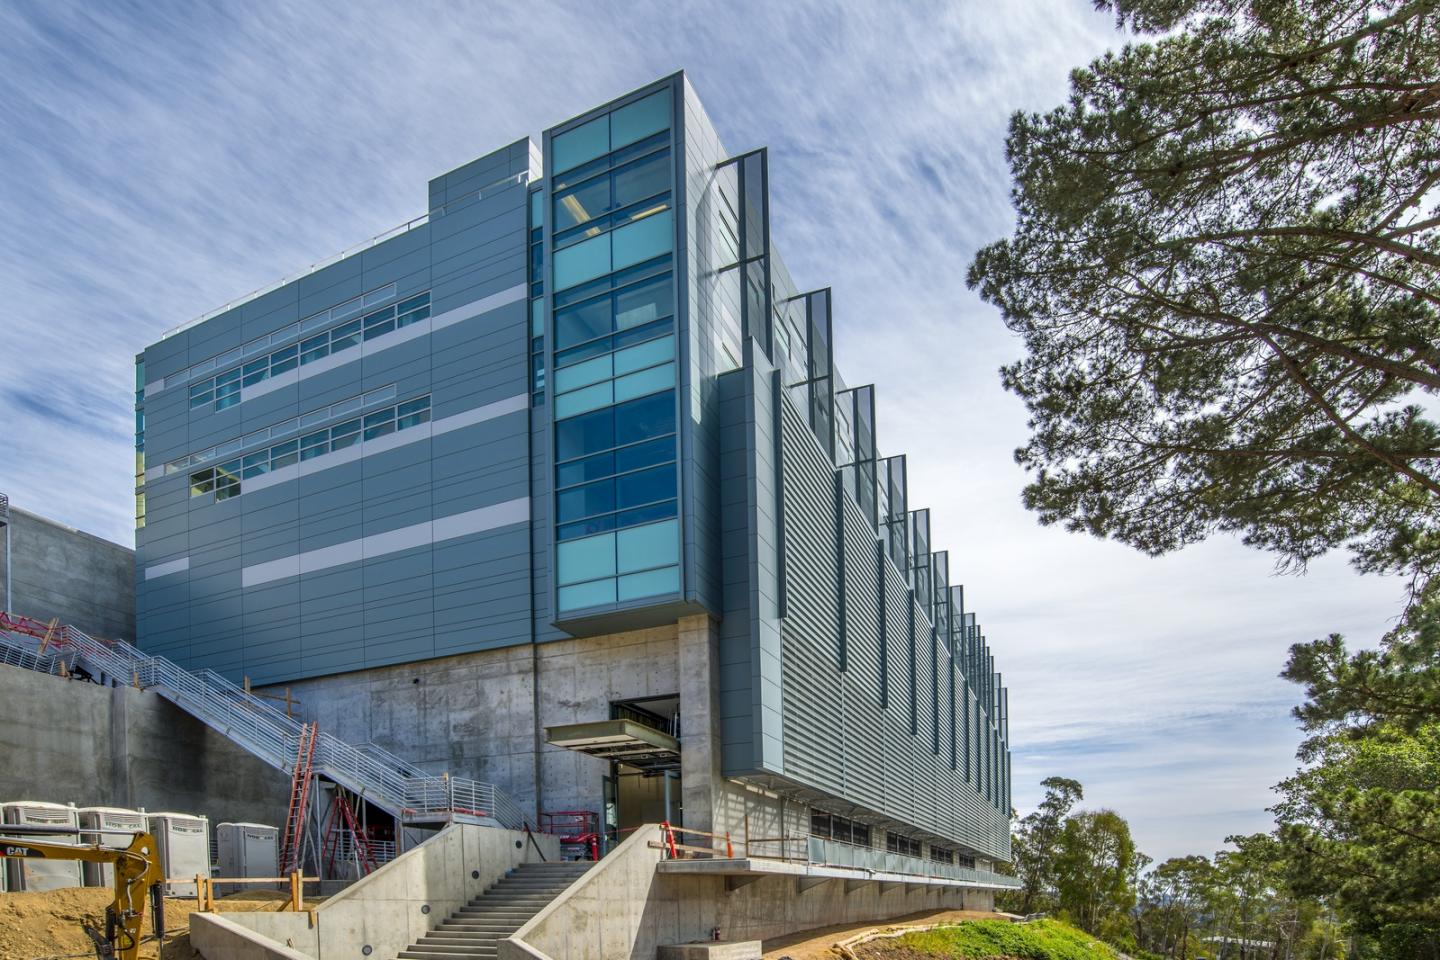 Berkeley Lab's Computational Research and Theory Facility